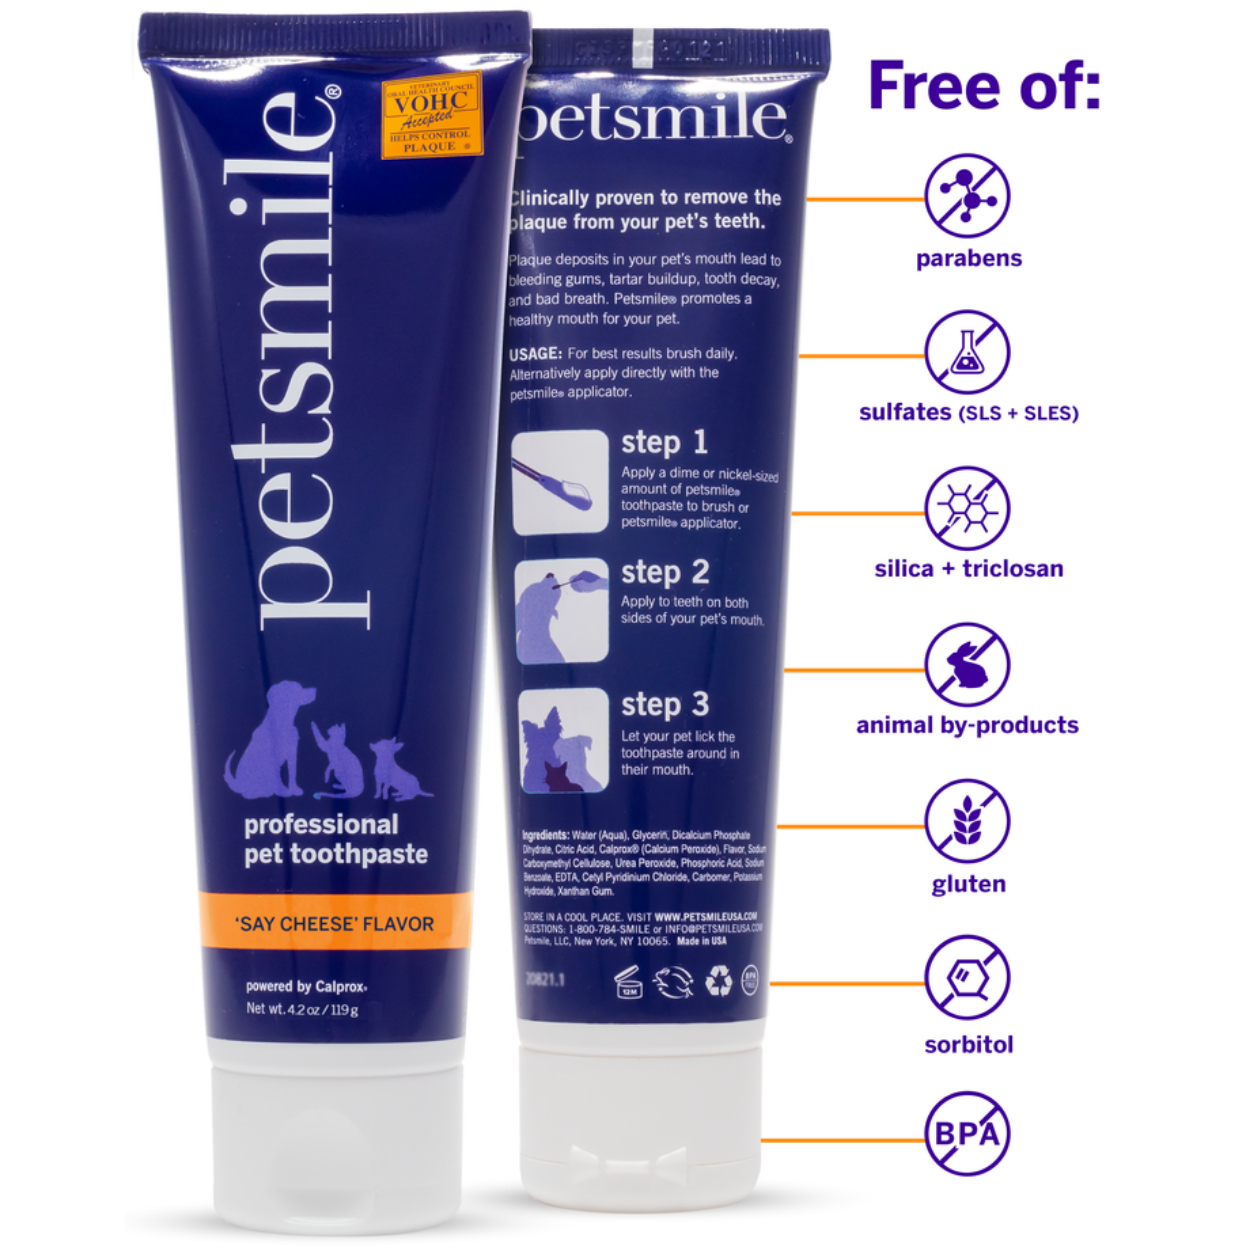 Petsmile Professional Toothpaste For Dog and Cat --Say Cheese Flavor 4.2 Oz